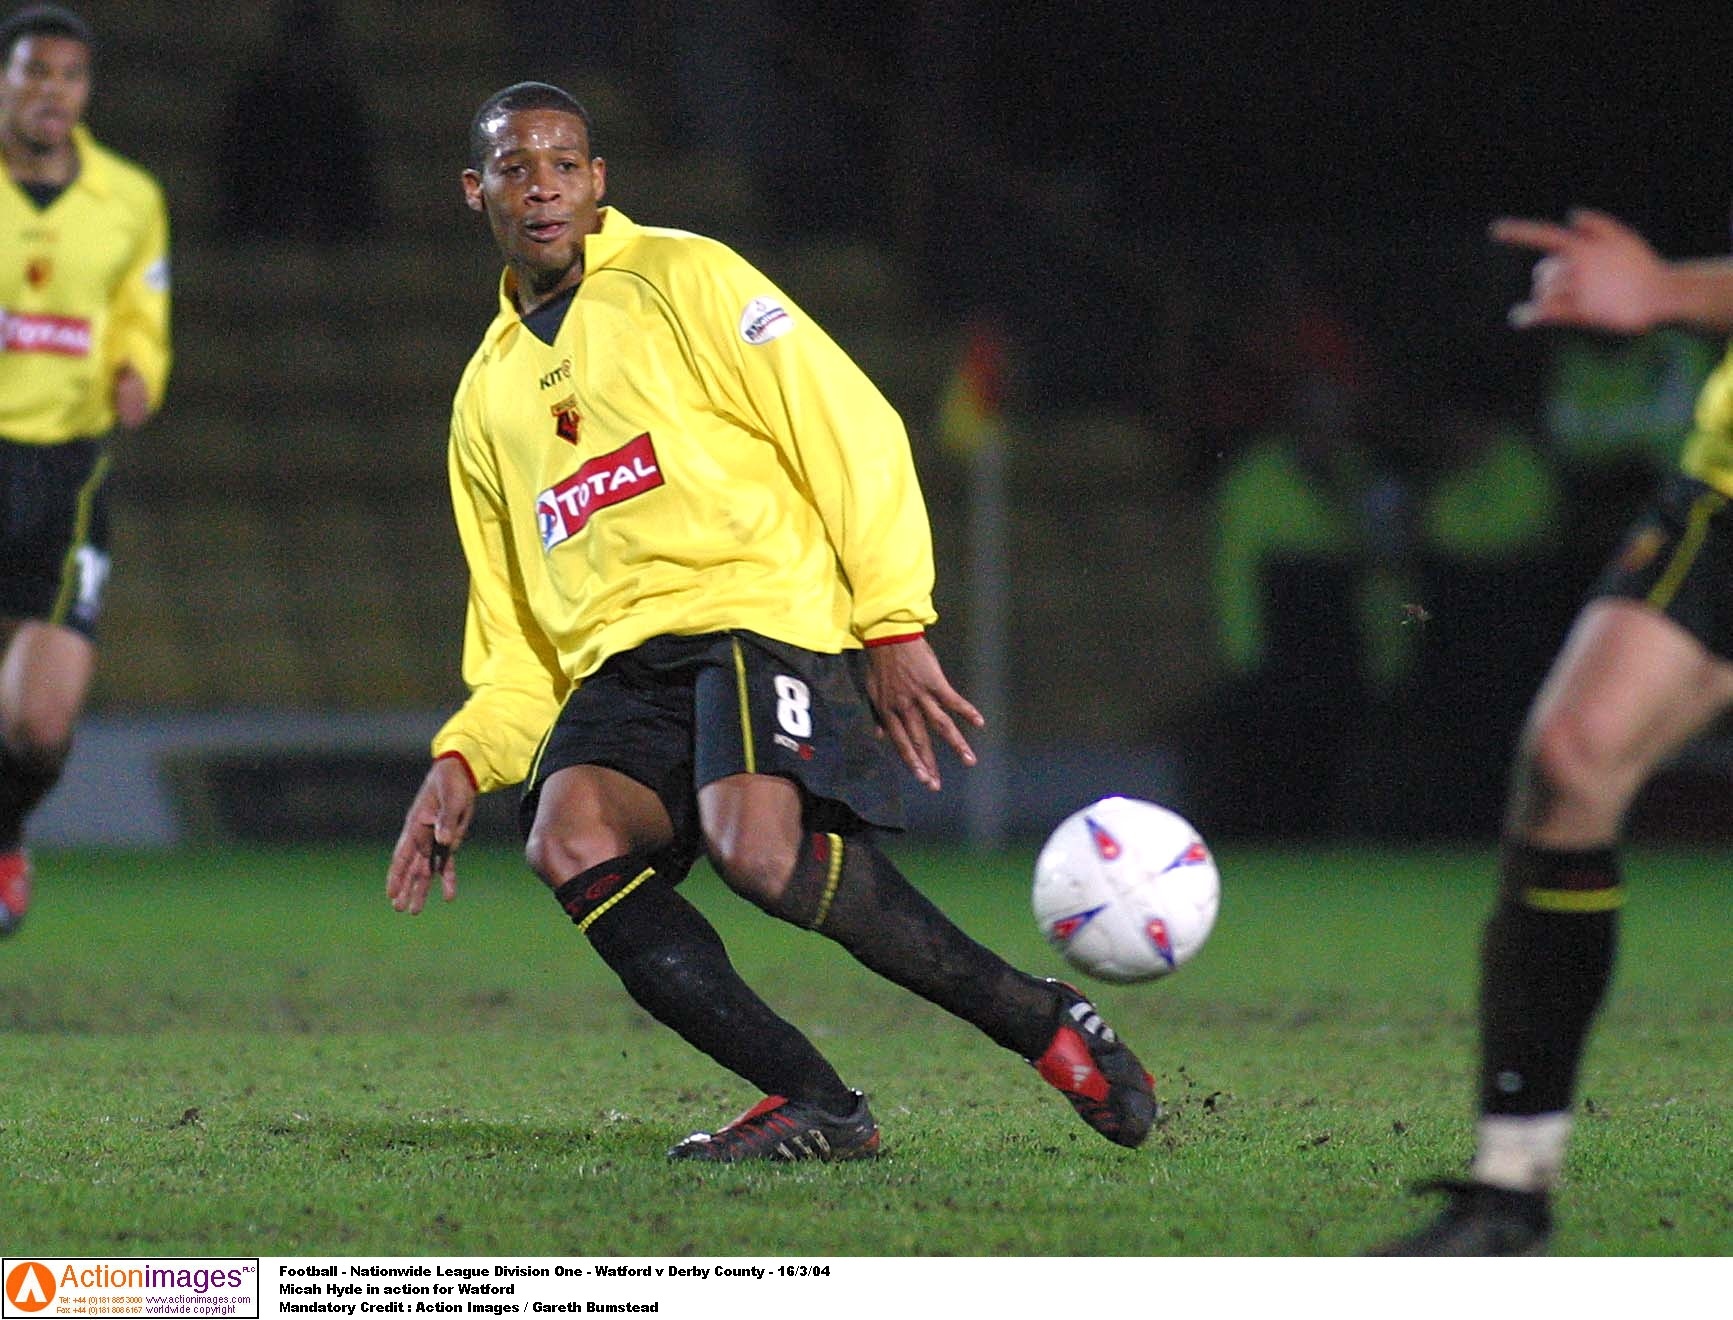 Micah Hyde claims Graham Taylor's illness helped Watford earn promotion in 1999